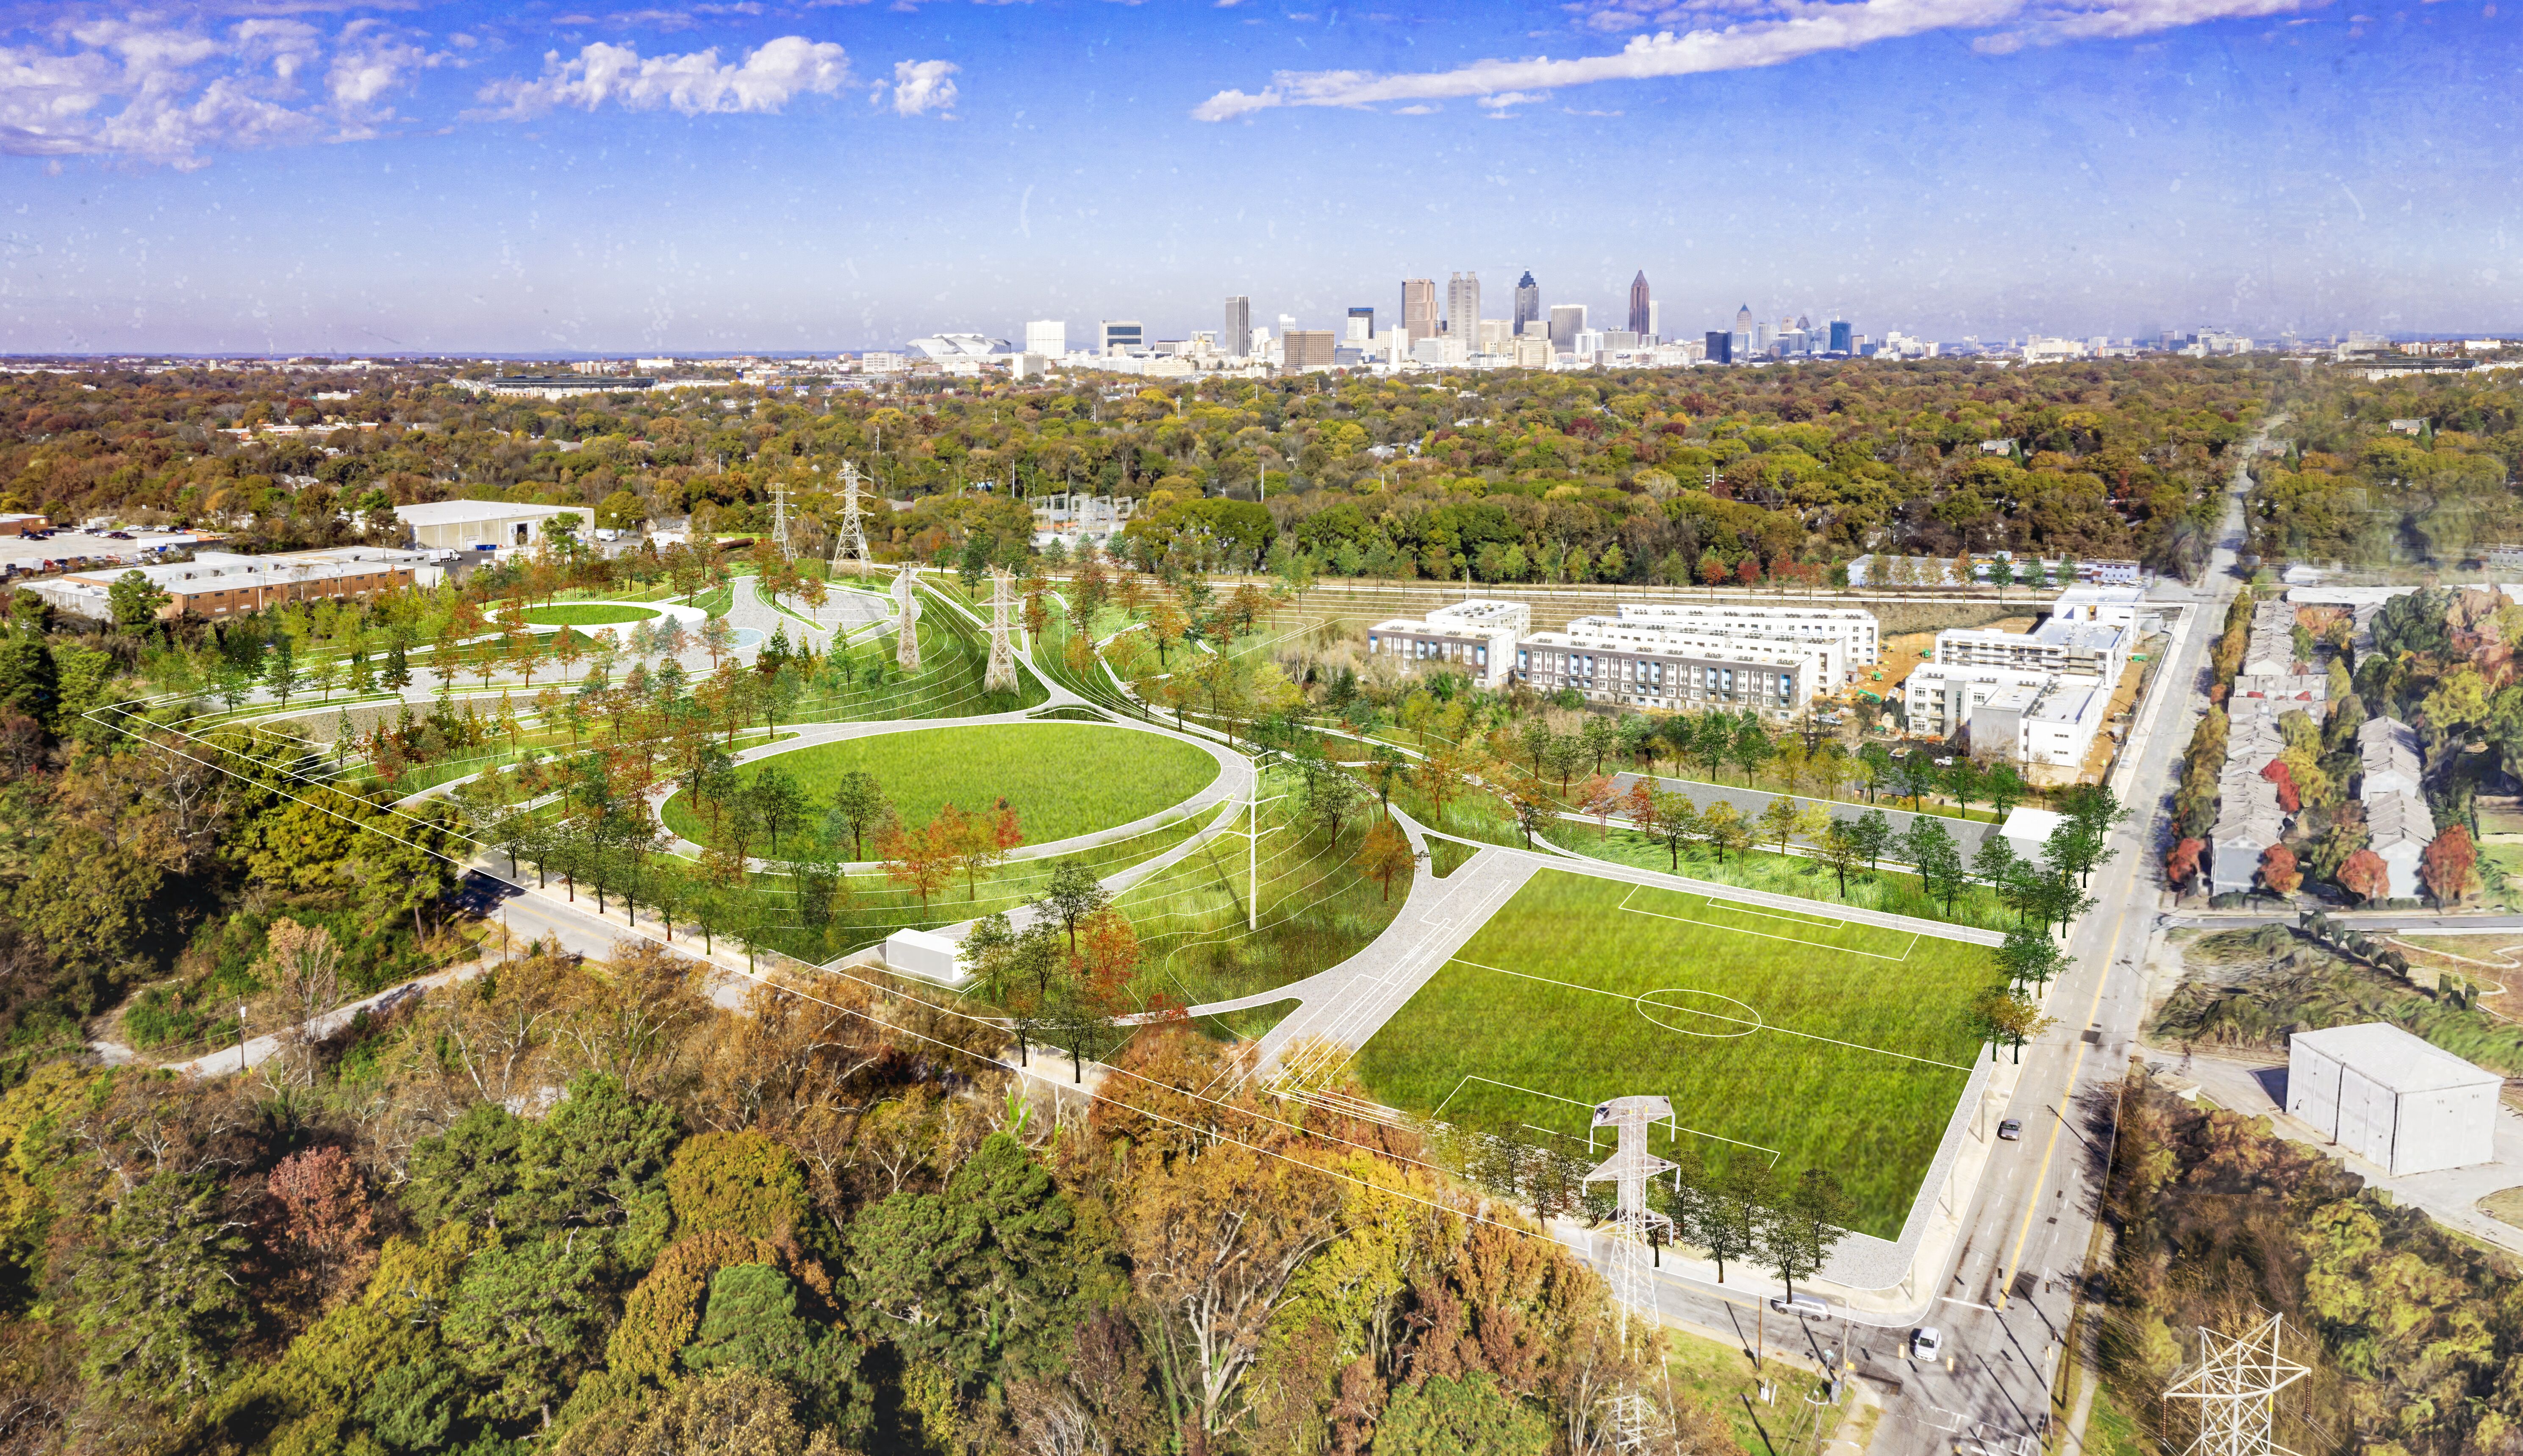 A rendering of large green spaces that would be a park expansion south of downtown Atlanta.